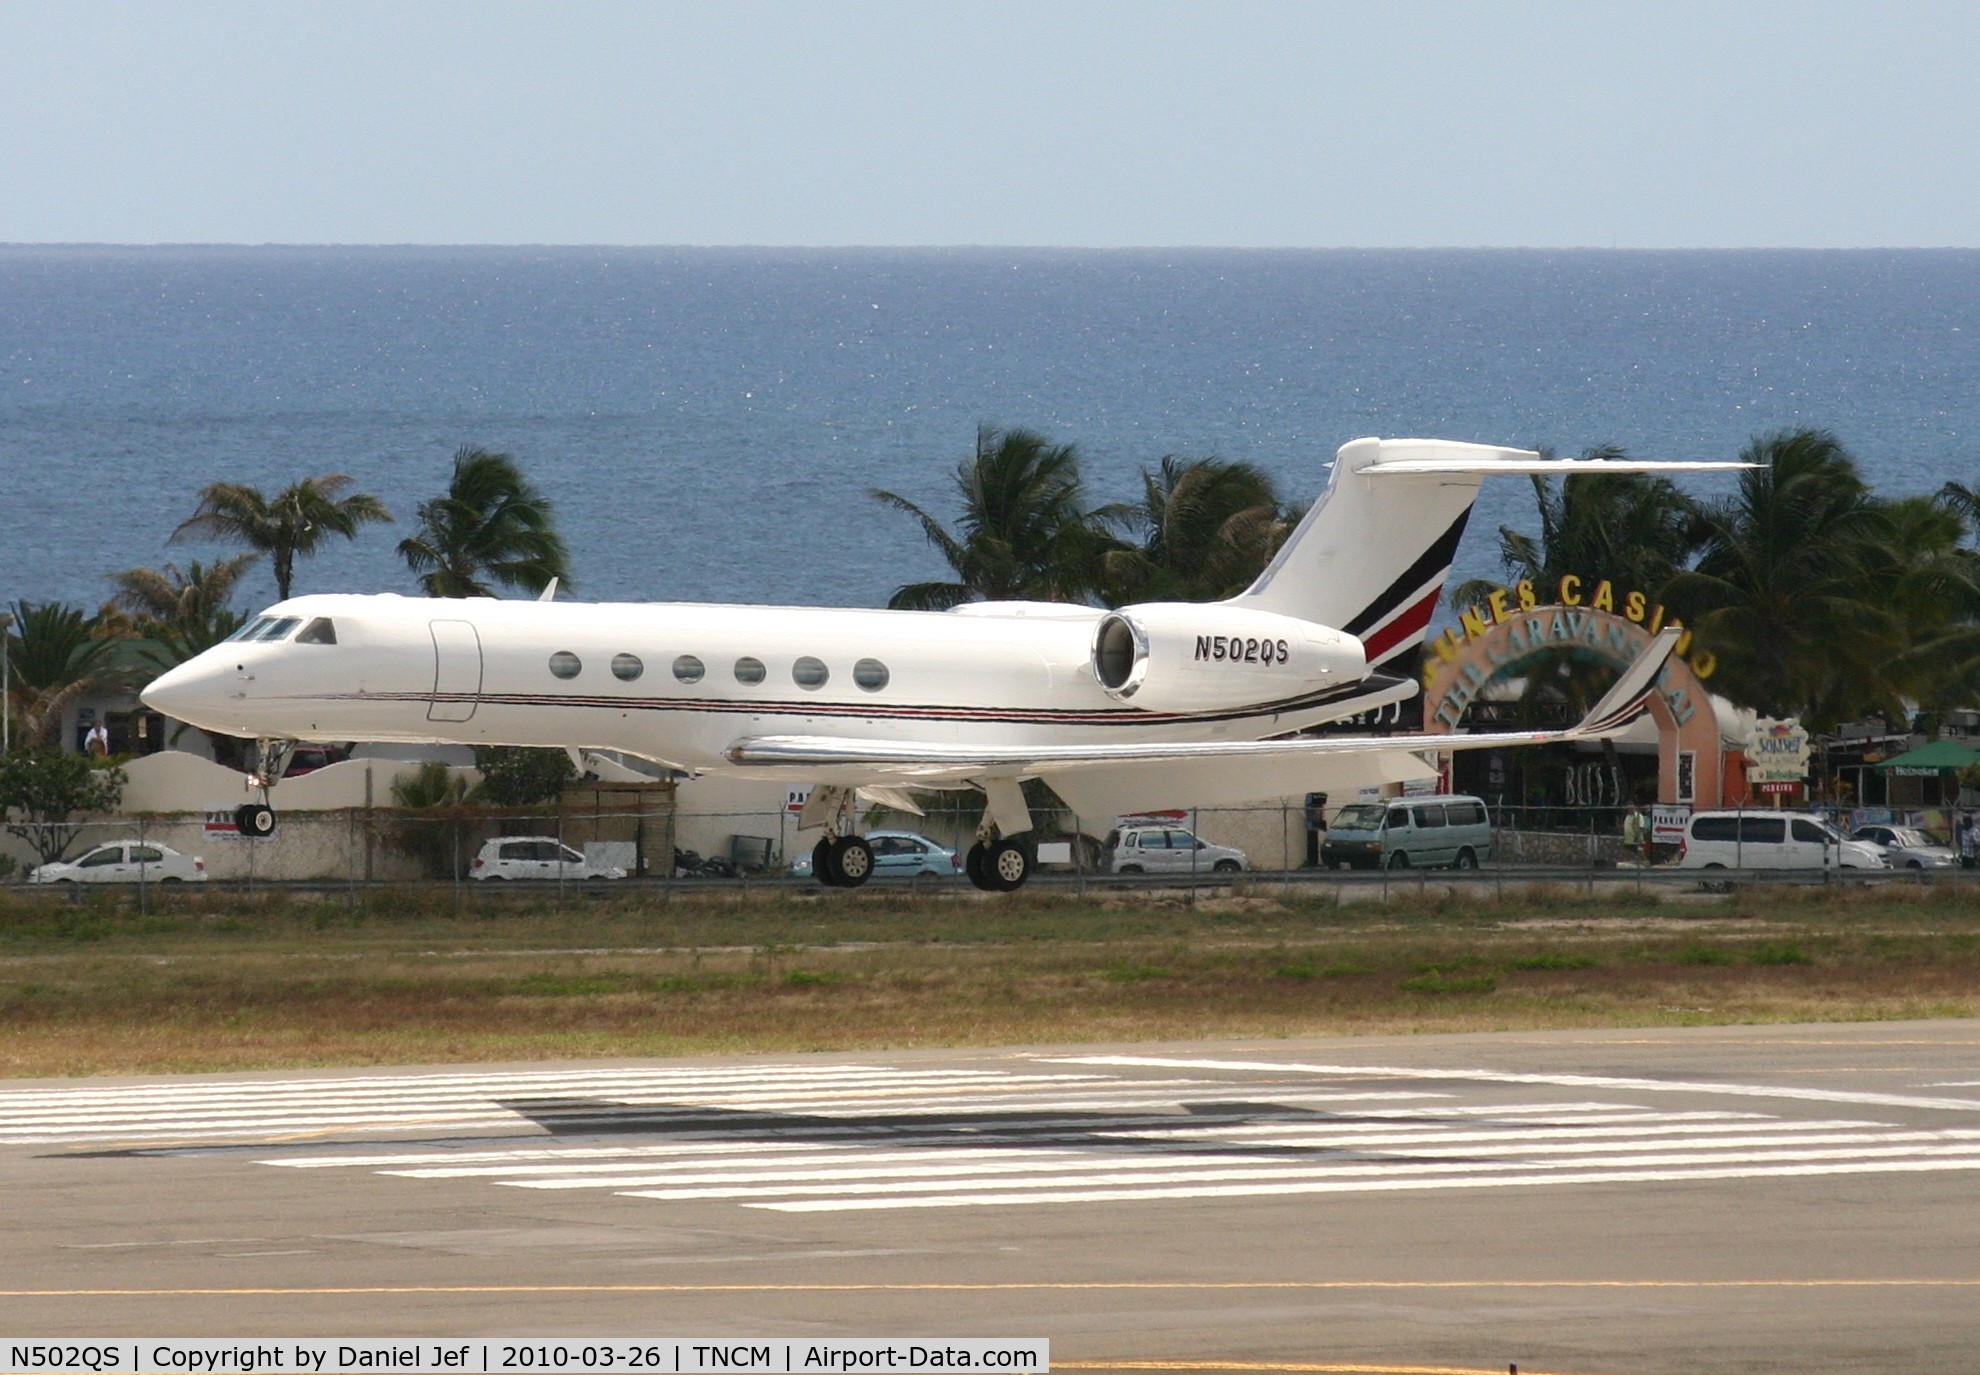 N502QS, 2000 Gulfstream Aerospace G-V C/N 601, N502QS over the lines at the tresh hold runway 10 at TNCM